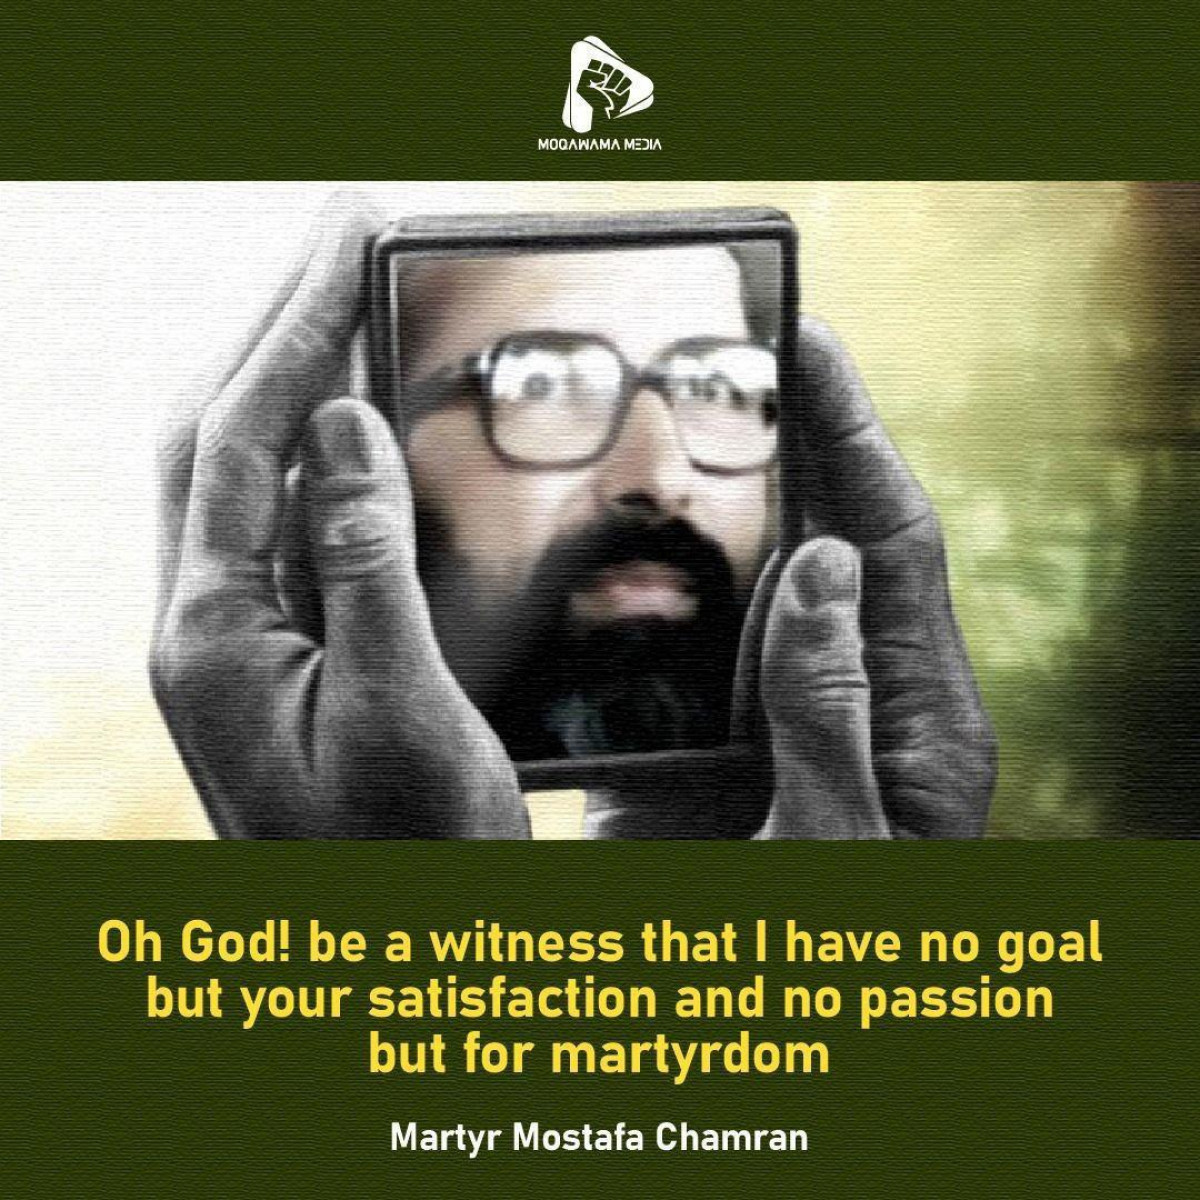 Oh God! be a witness that I have no goal but your satisfaction and no passion but for martyrdom.